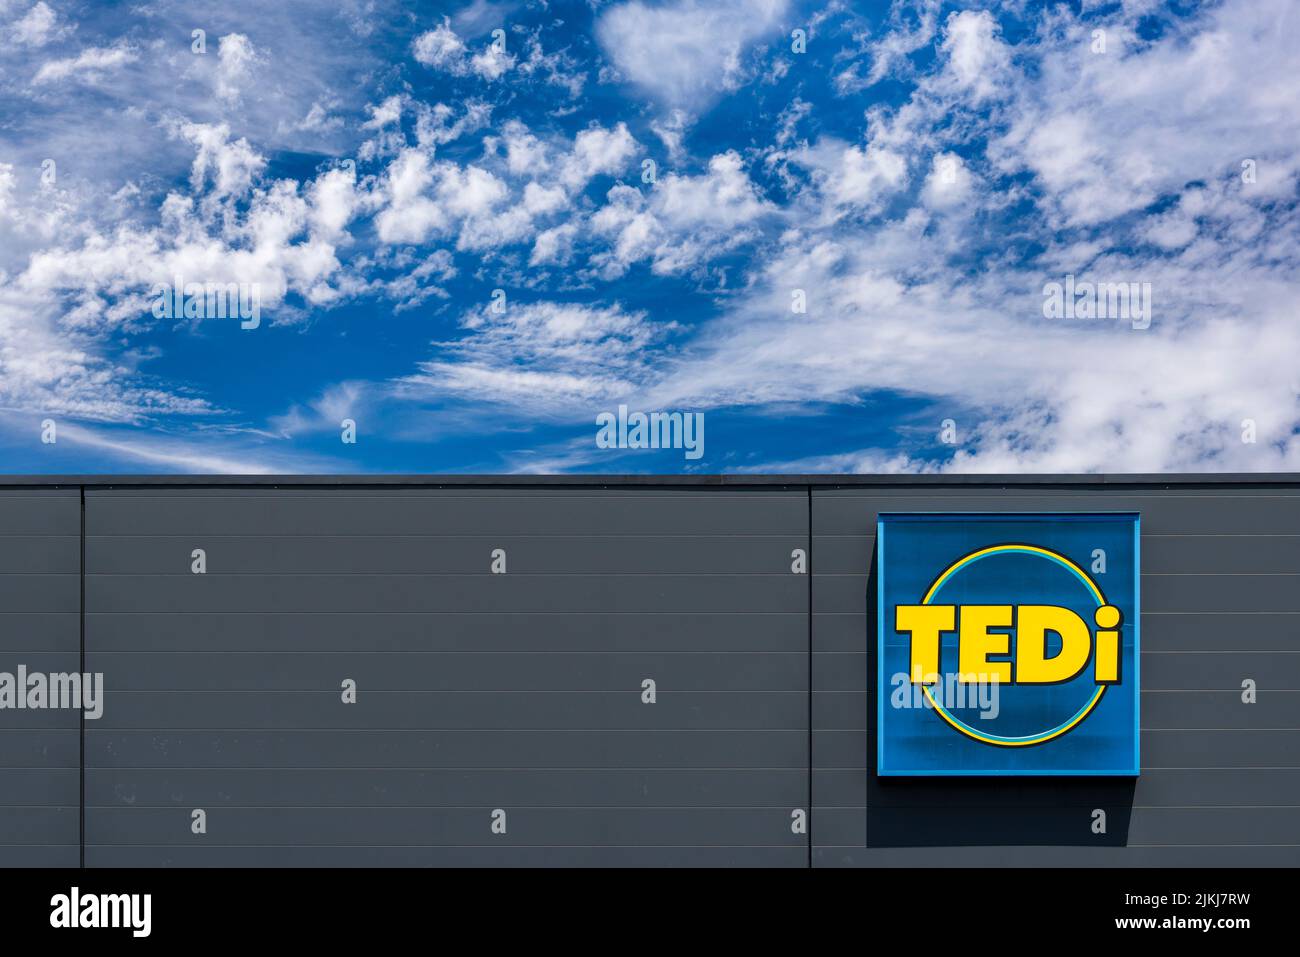 Advertising and company sign of the company Tedi Stock Photo